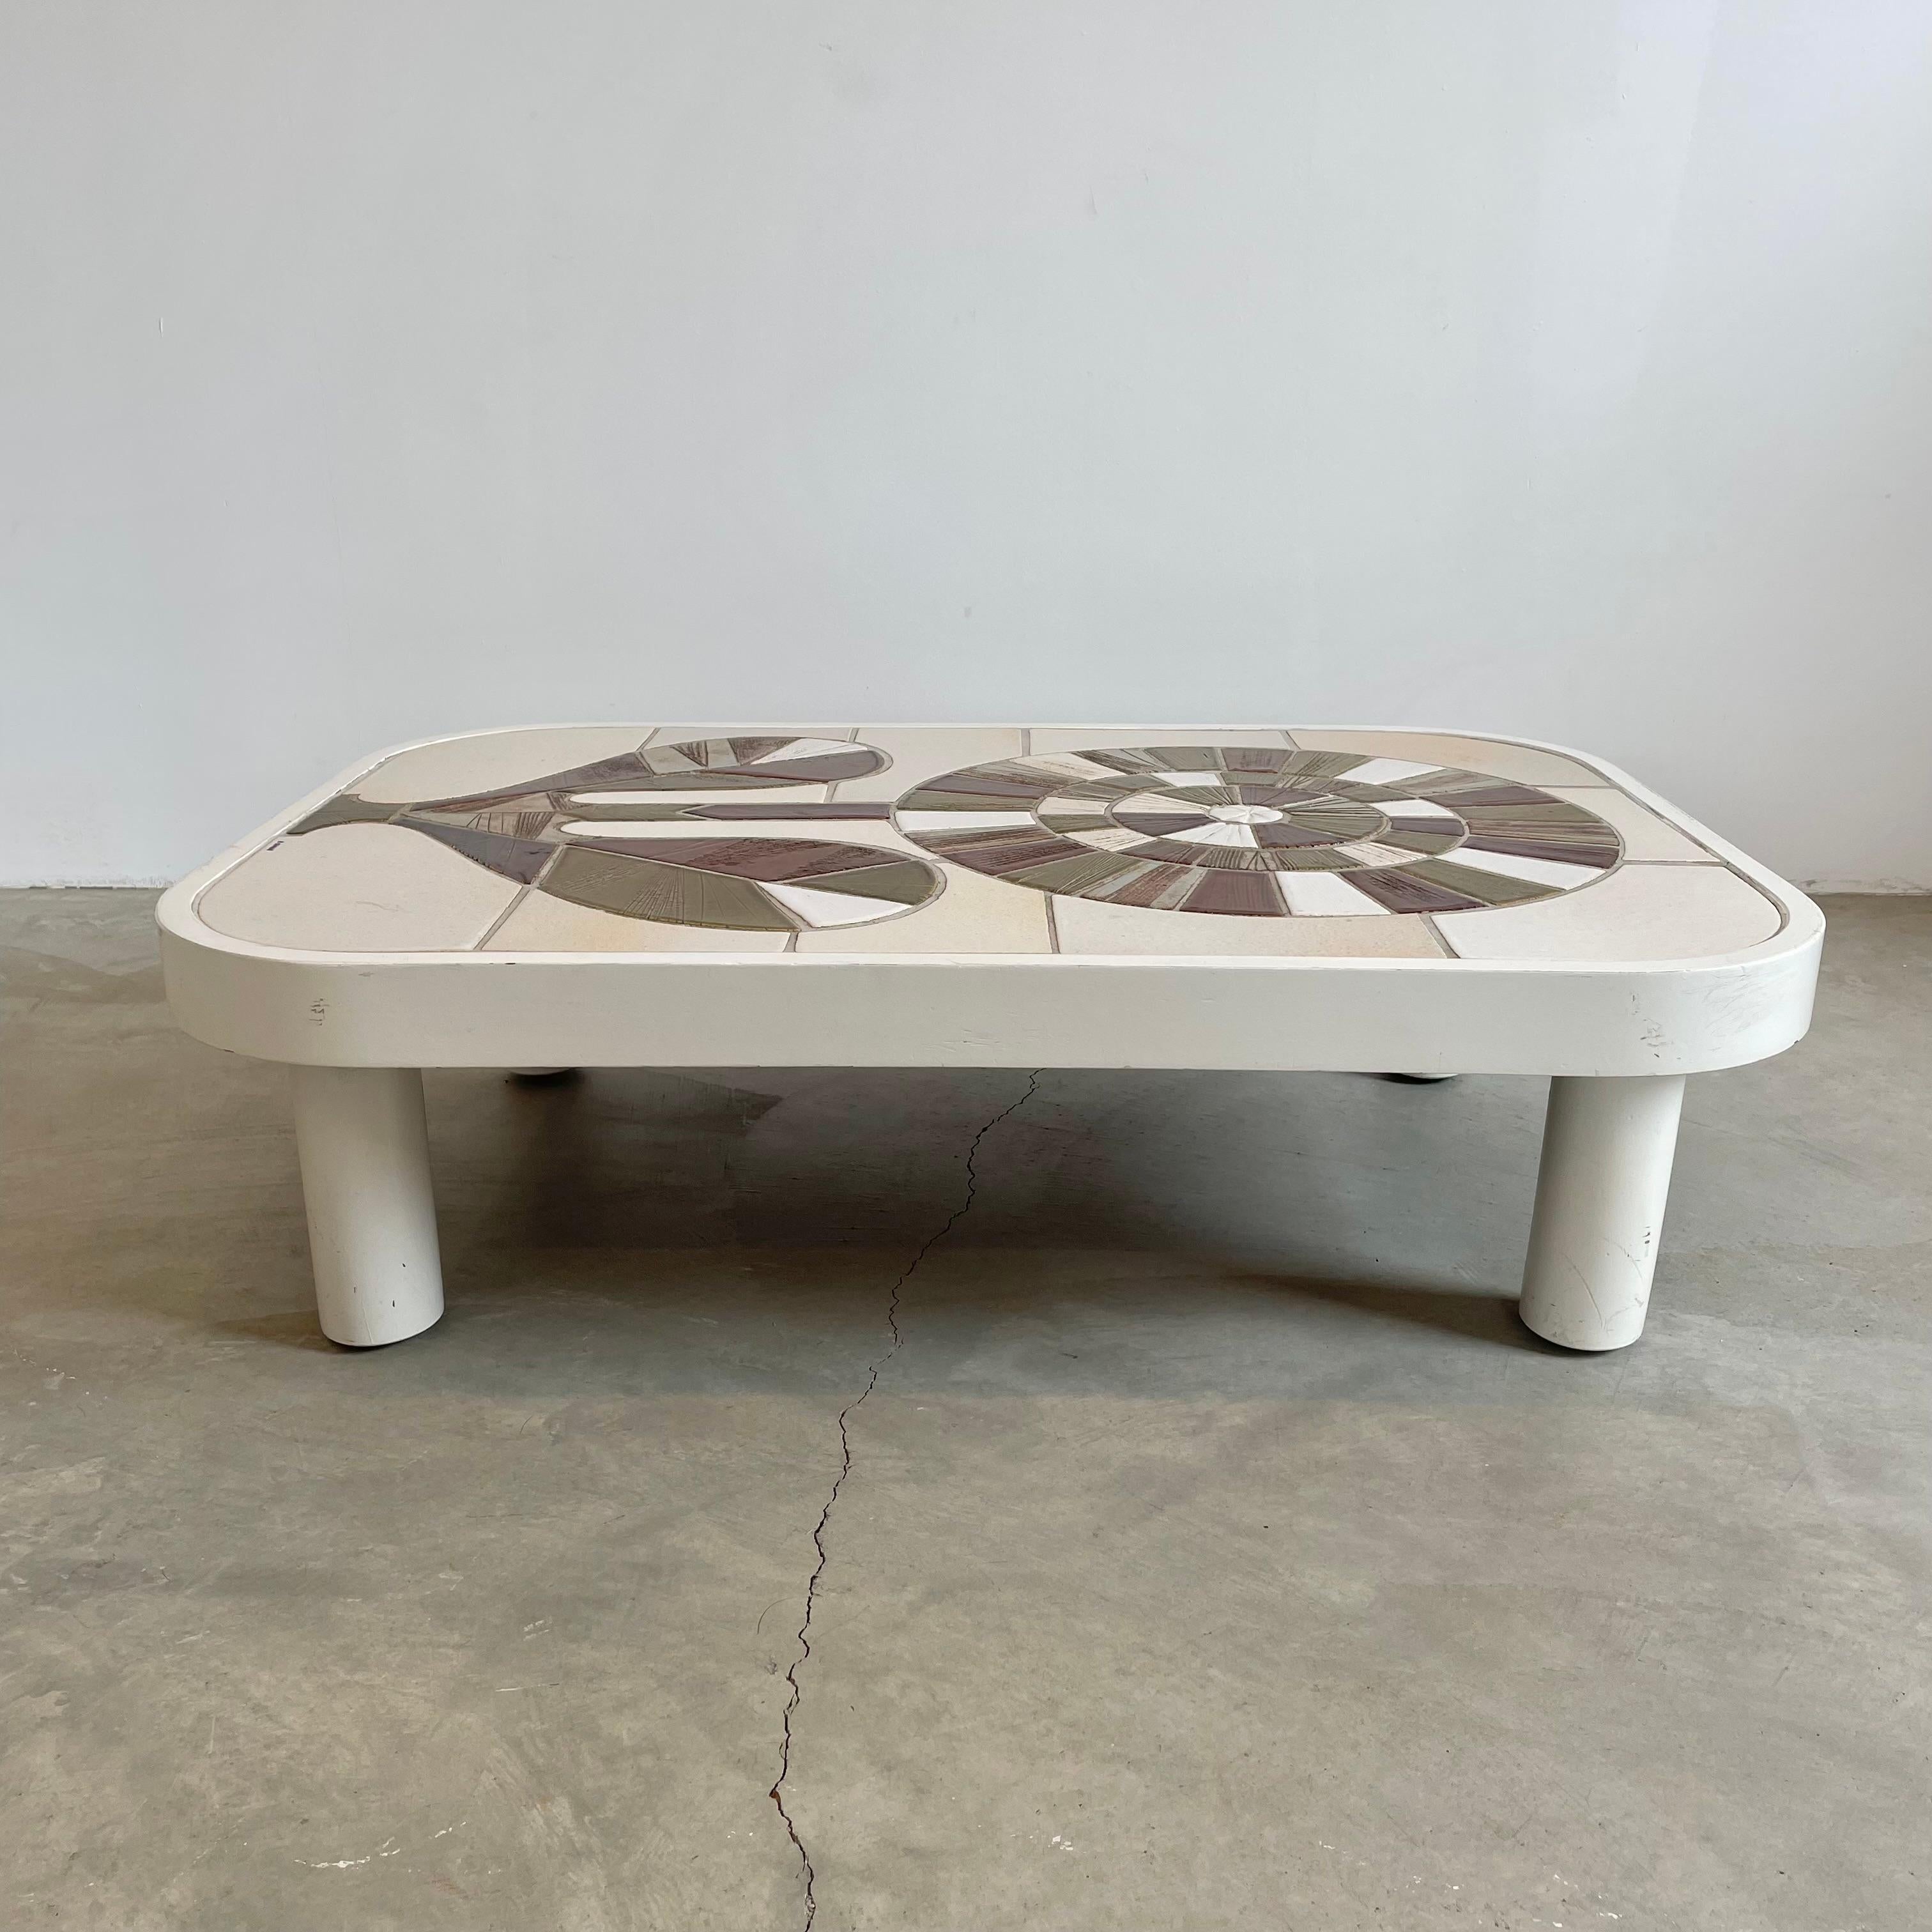 Beautiful French coffee table with intricately composed ceramic tiles by French ceramic artist Roger Capron. It features a vibrant motif of a flower created by differently colored tiles drawing inspiration from Scandinavian modernism.